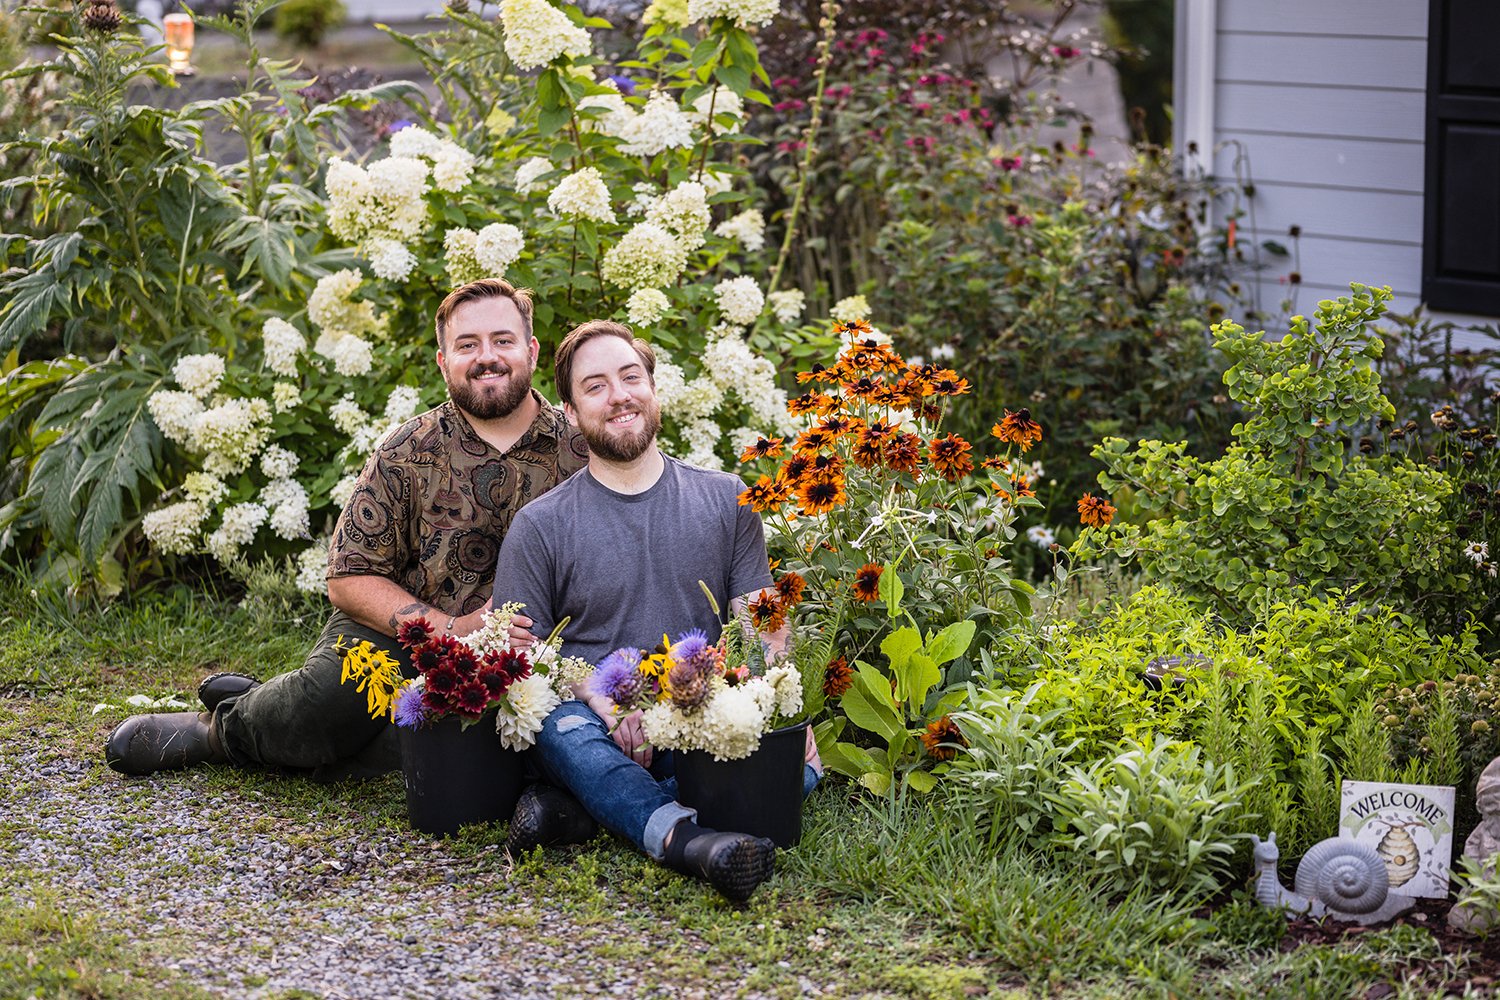 A gay couple sits in their garden at their farm, Fae Cottage Flower Farm with buckets of plucked flowers near them. The pair smile towards the camera during their photoshoot.